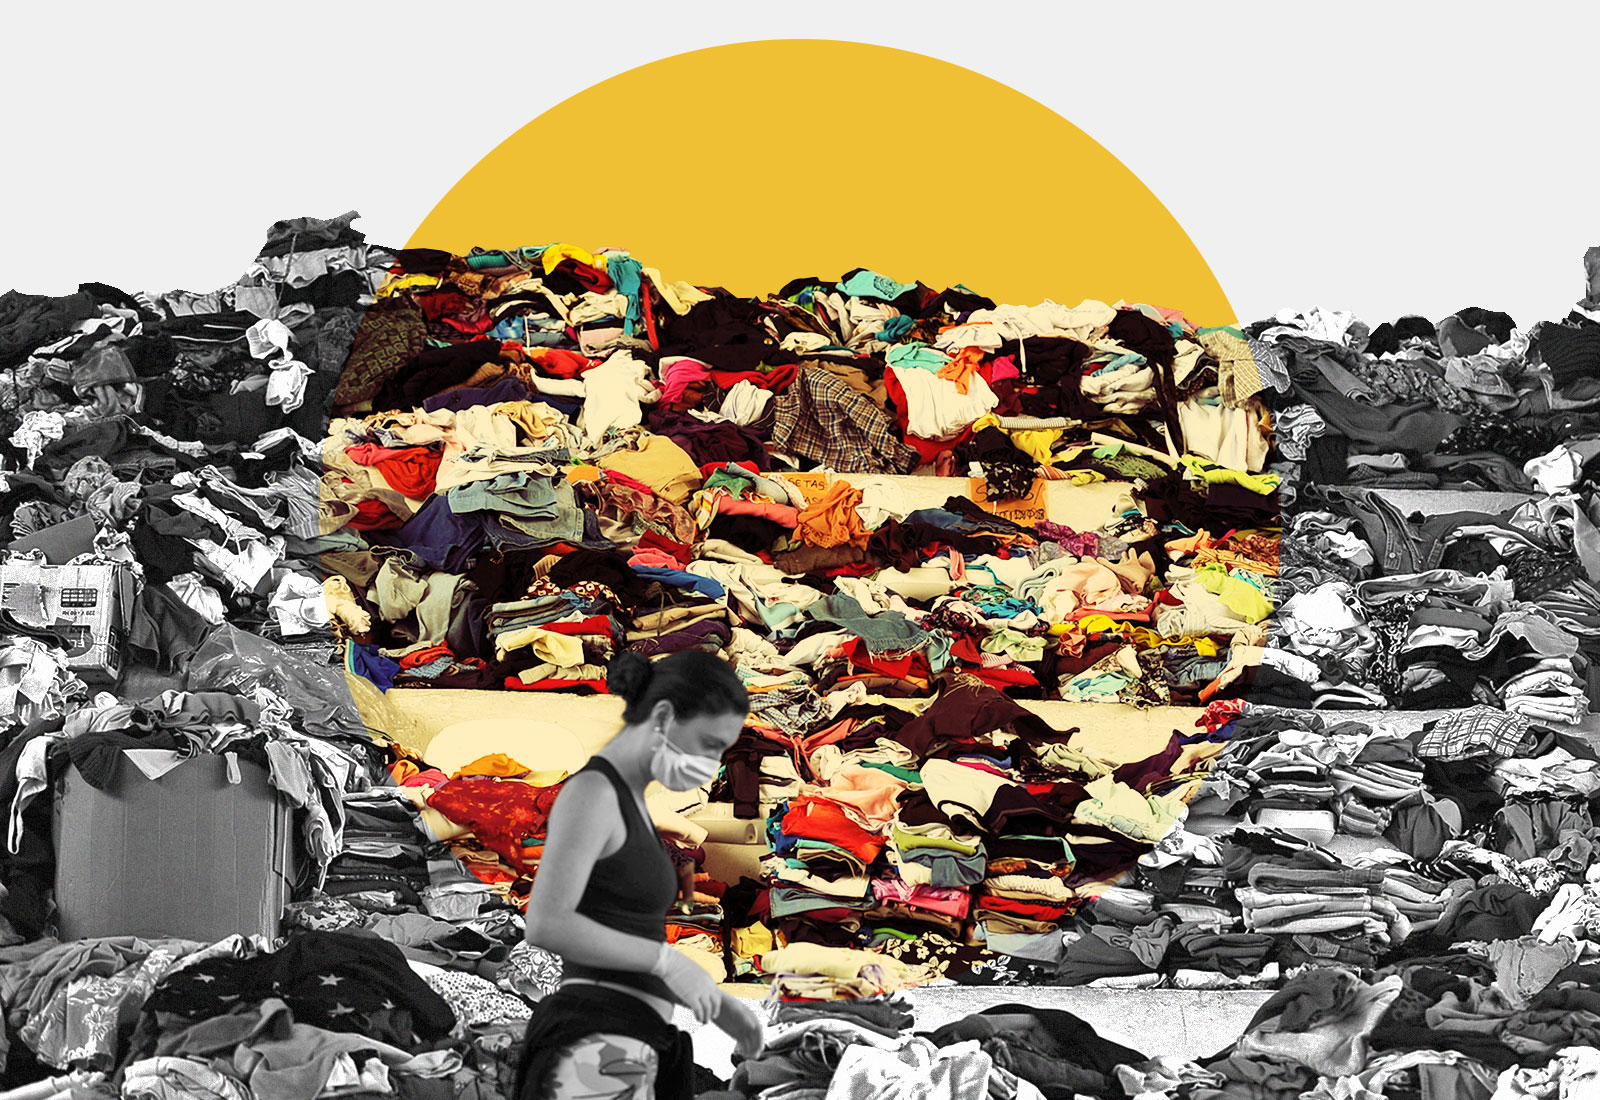 collage: black and white photo of woman sorting huge pile of clothes, yellow circle on top with the clothing inside it in color